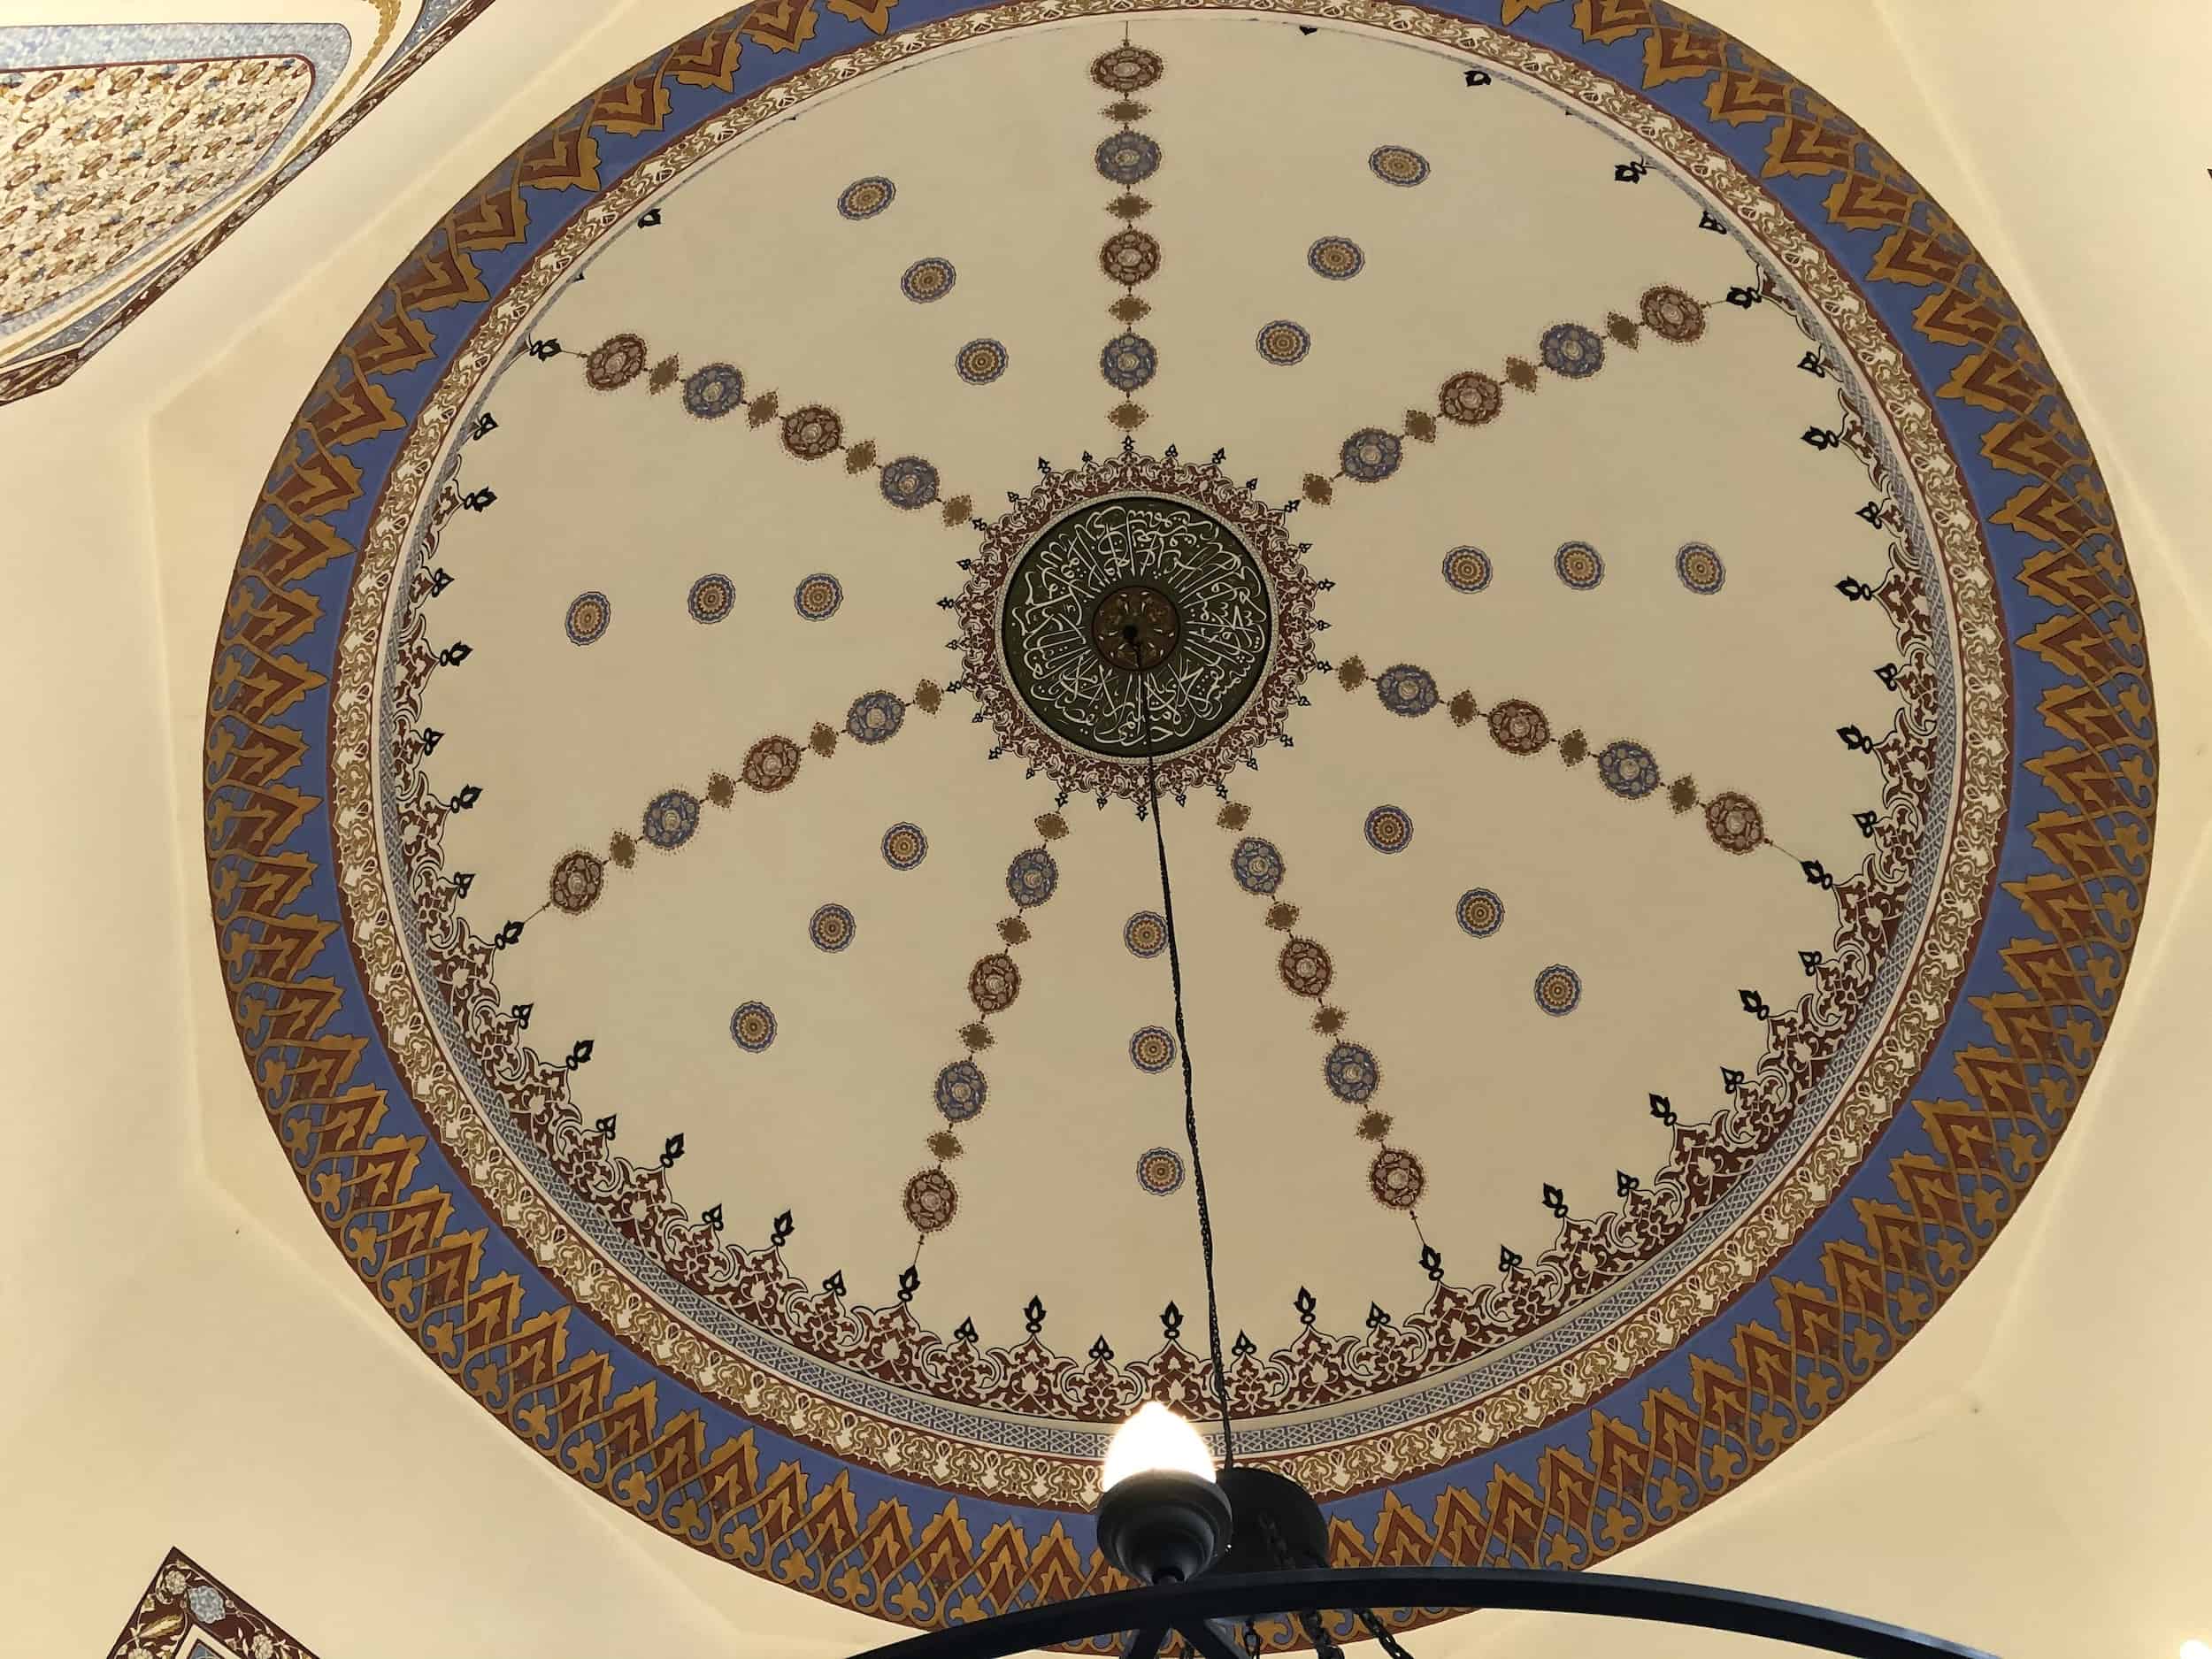 Dome of the tomb of Hafsa Sultan